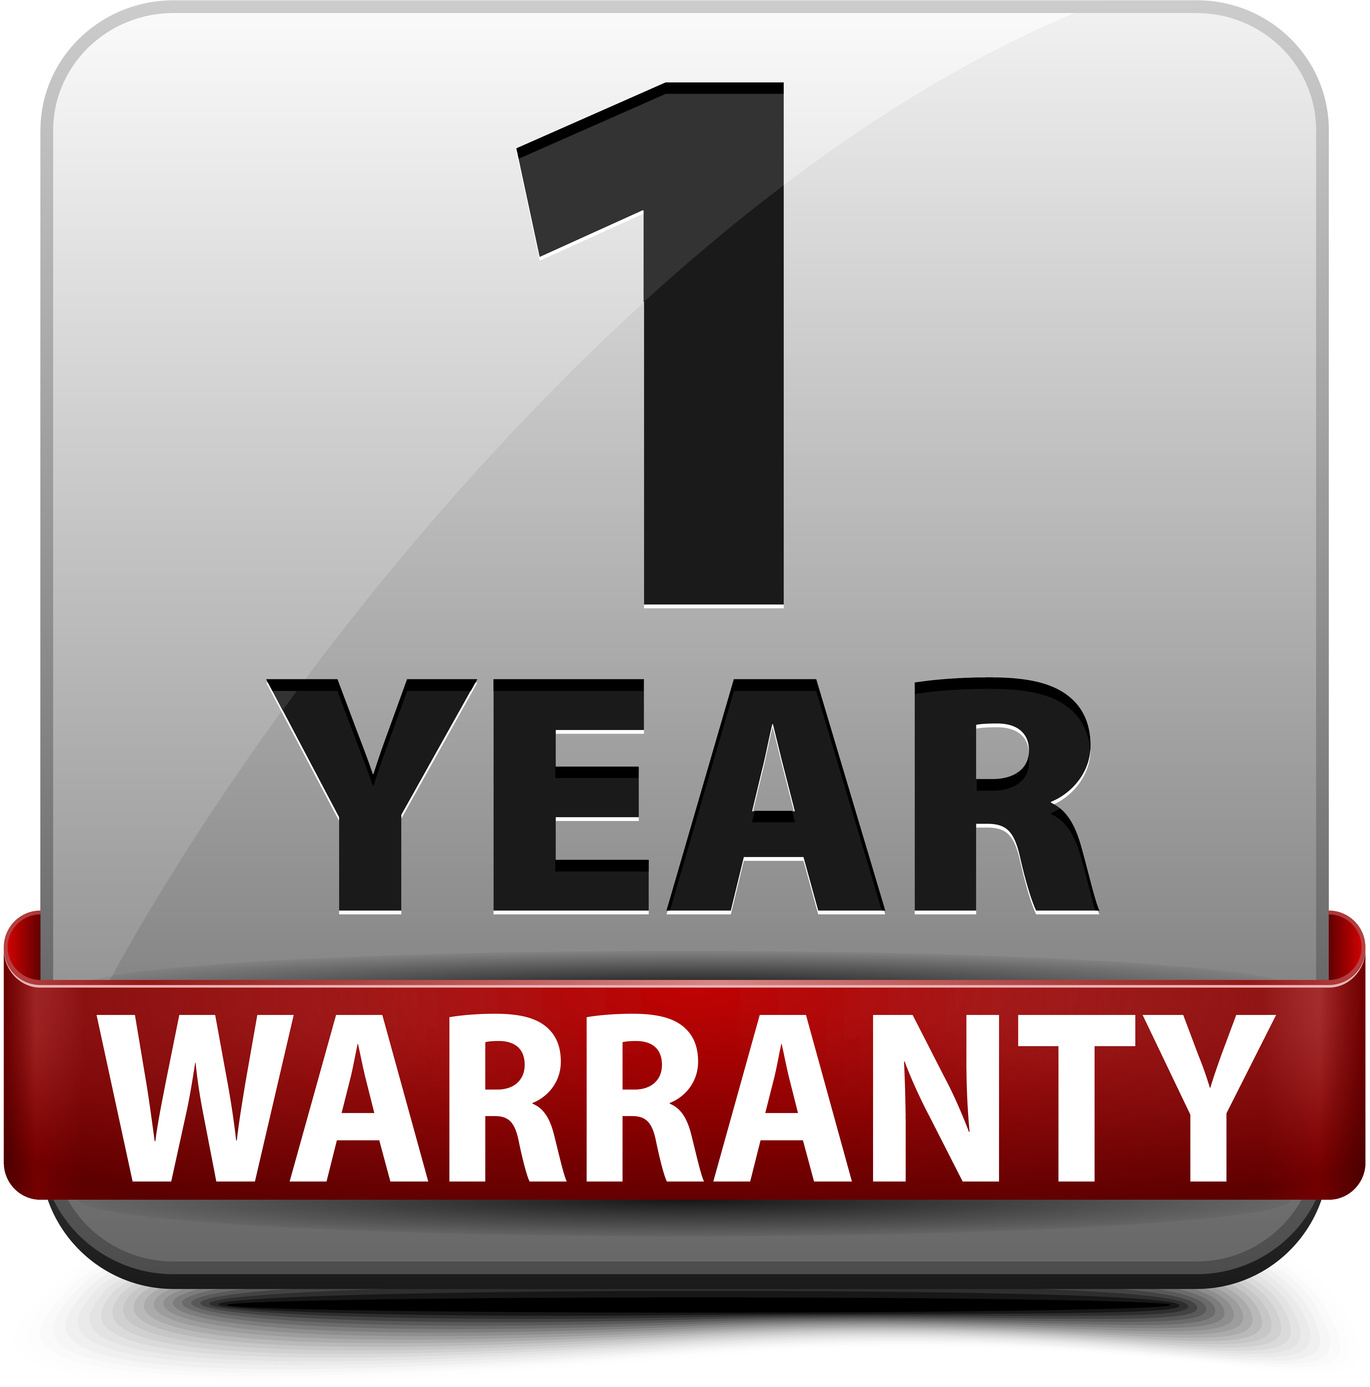 In most cases, a one-year warranty is ideal for a moisture meter product.